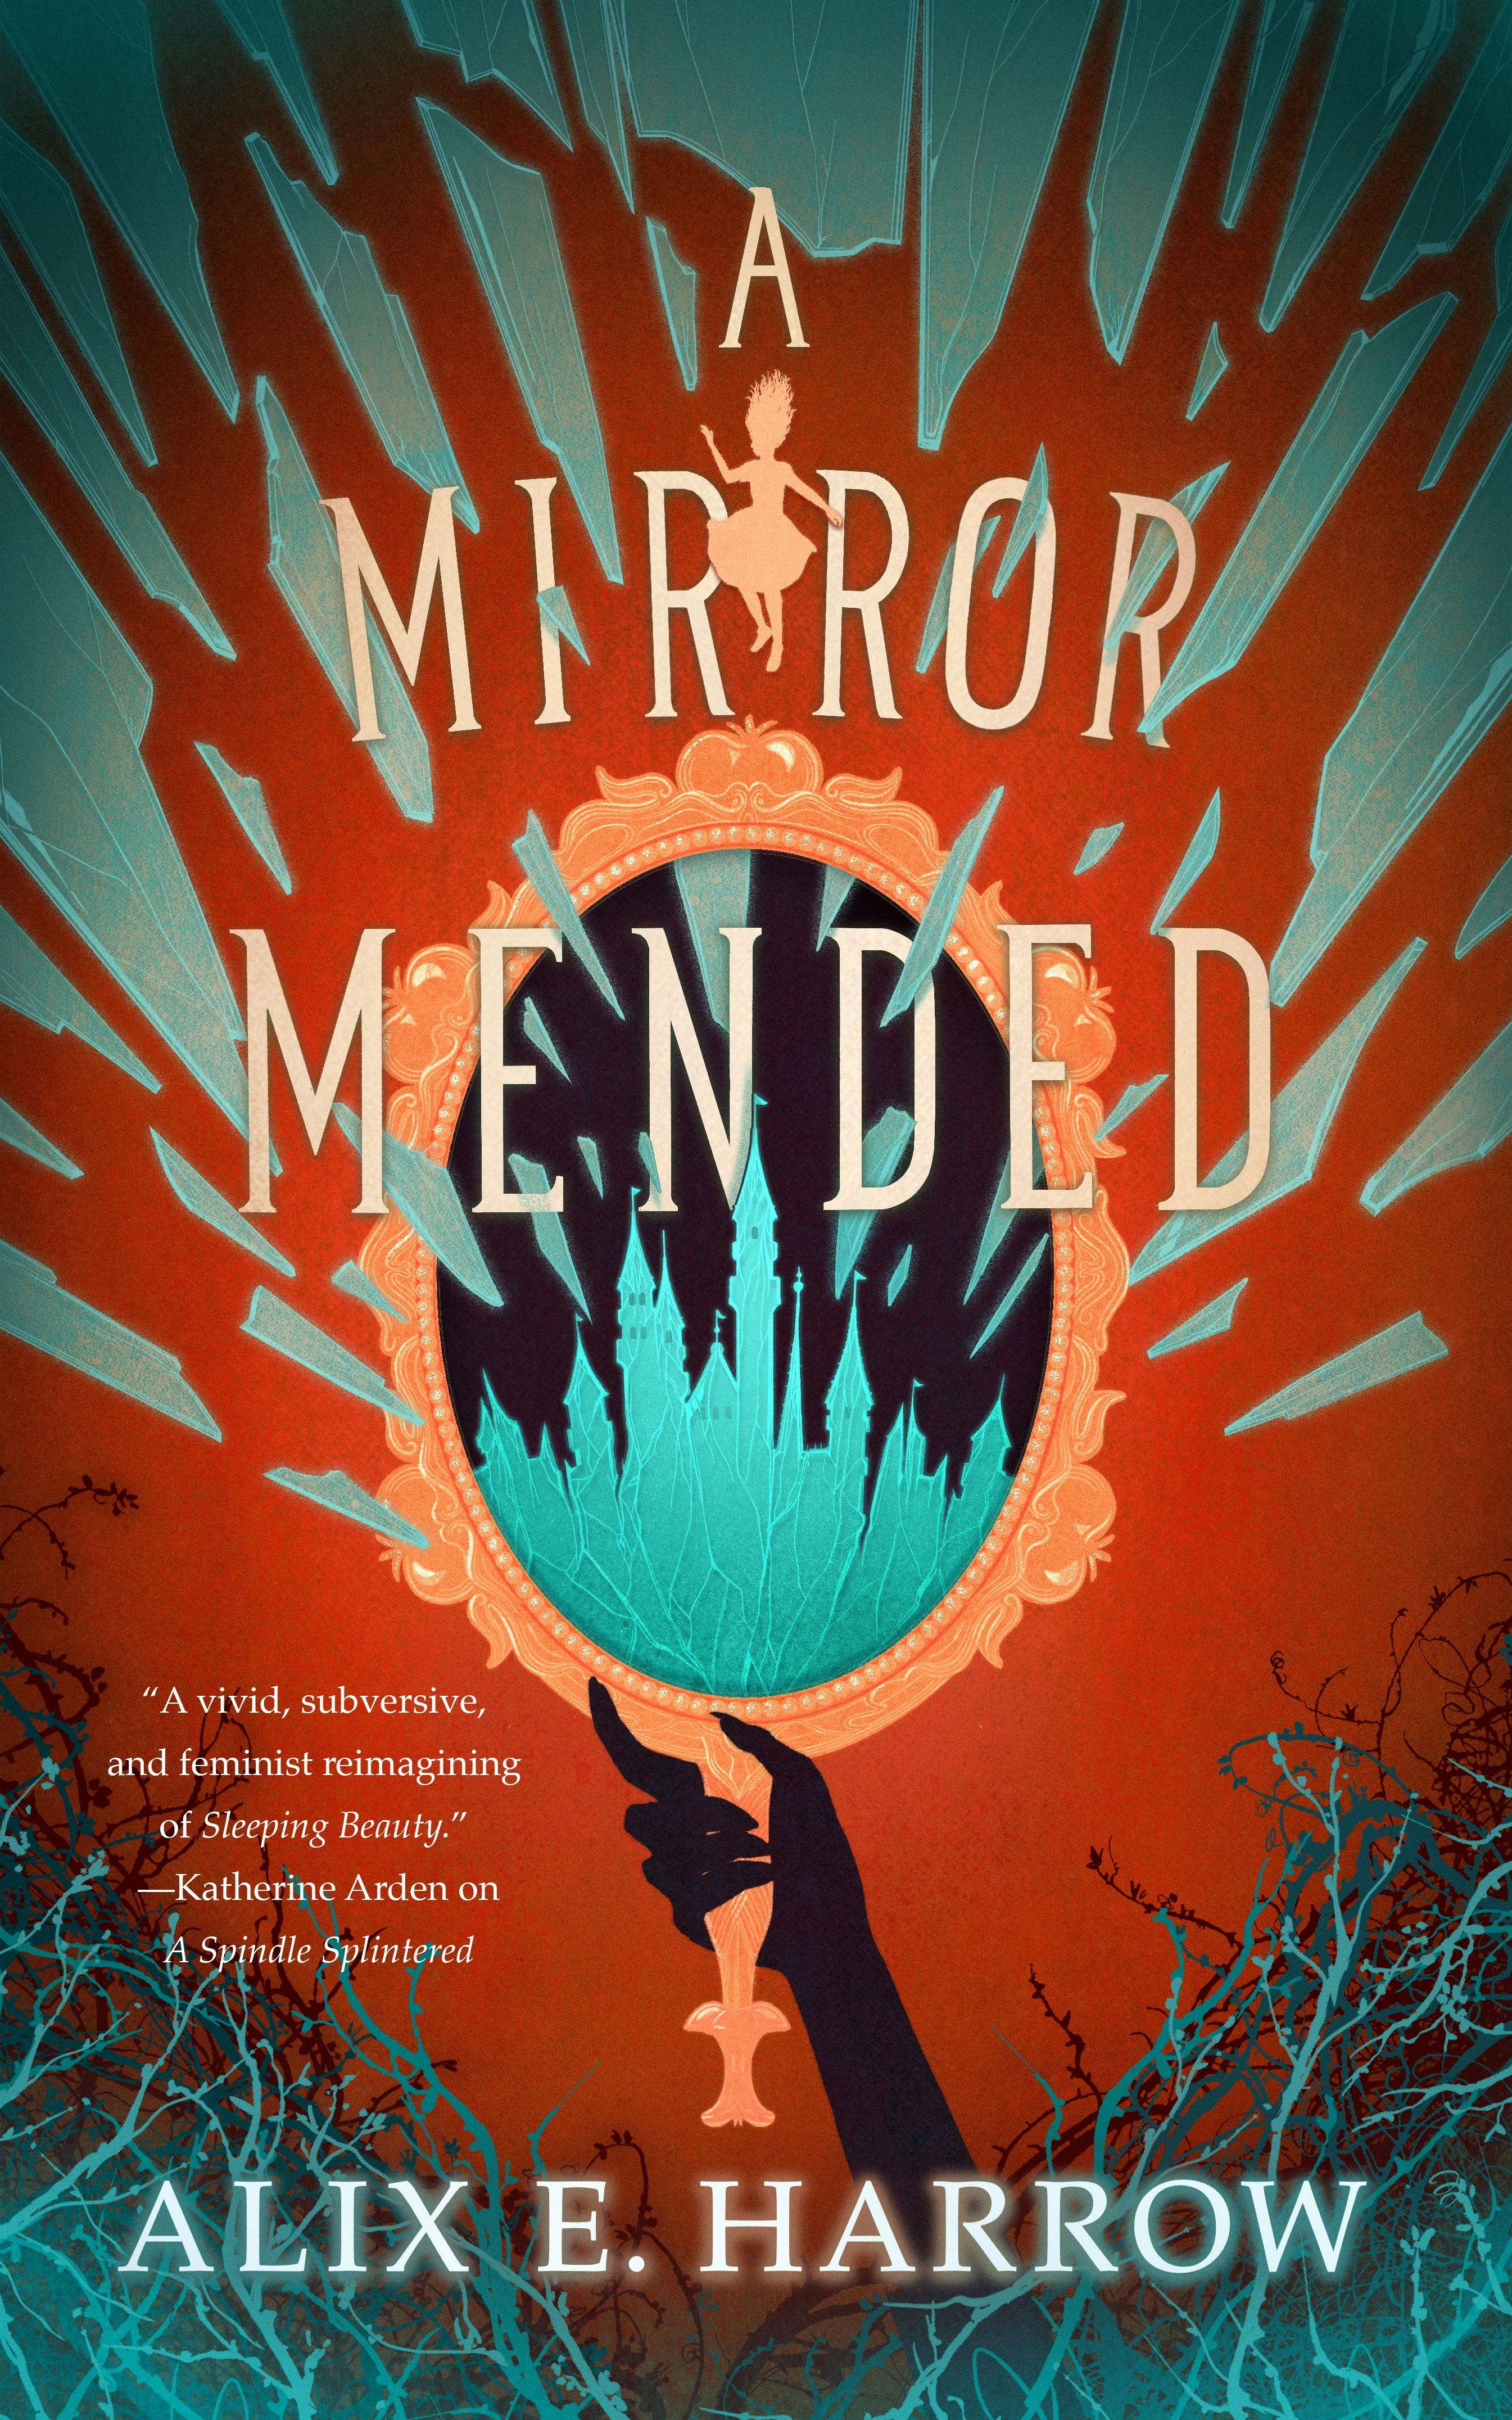 Cover for the book titled as: A Mirror Mended